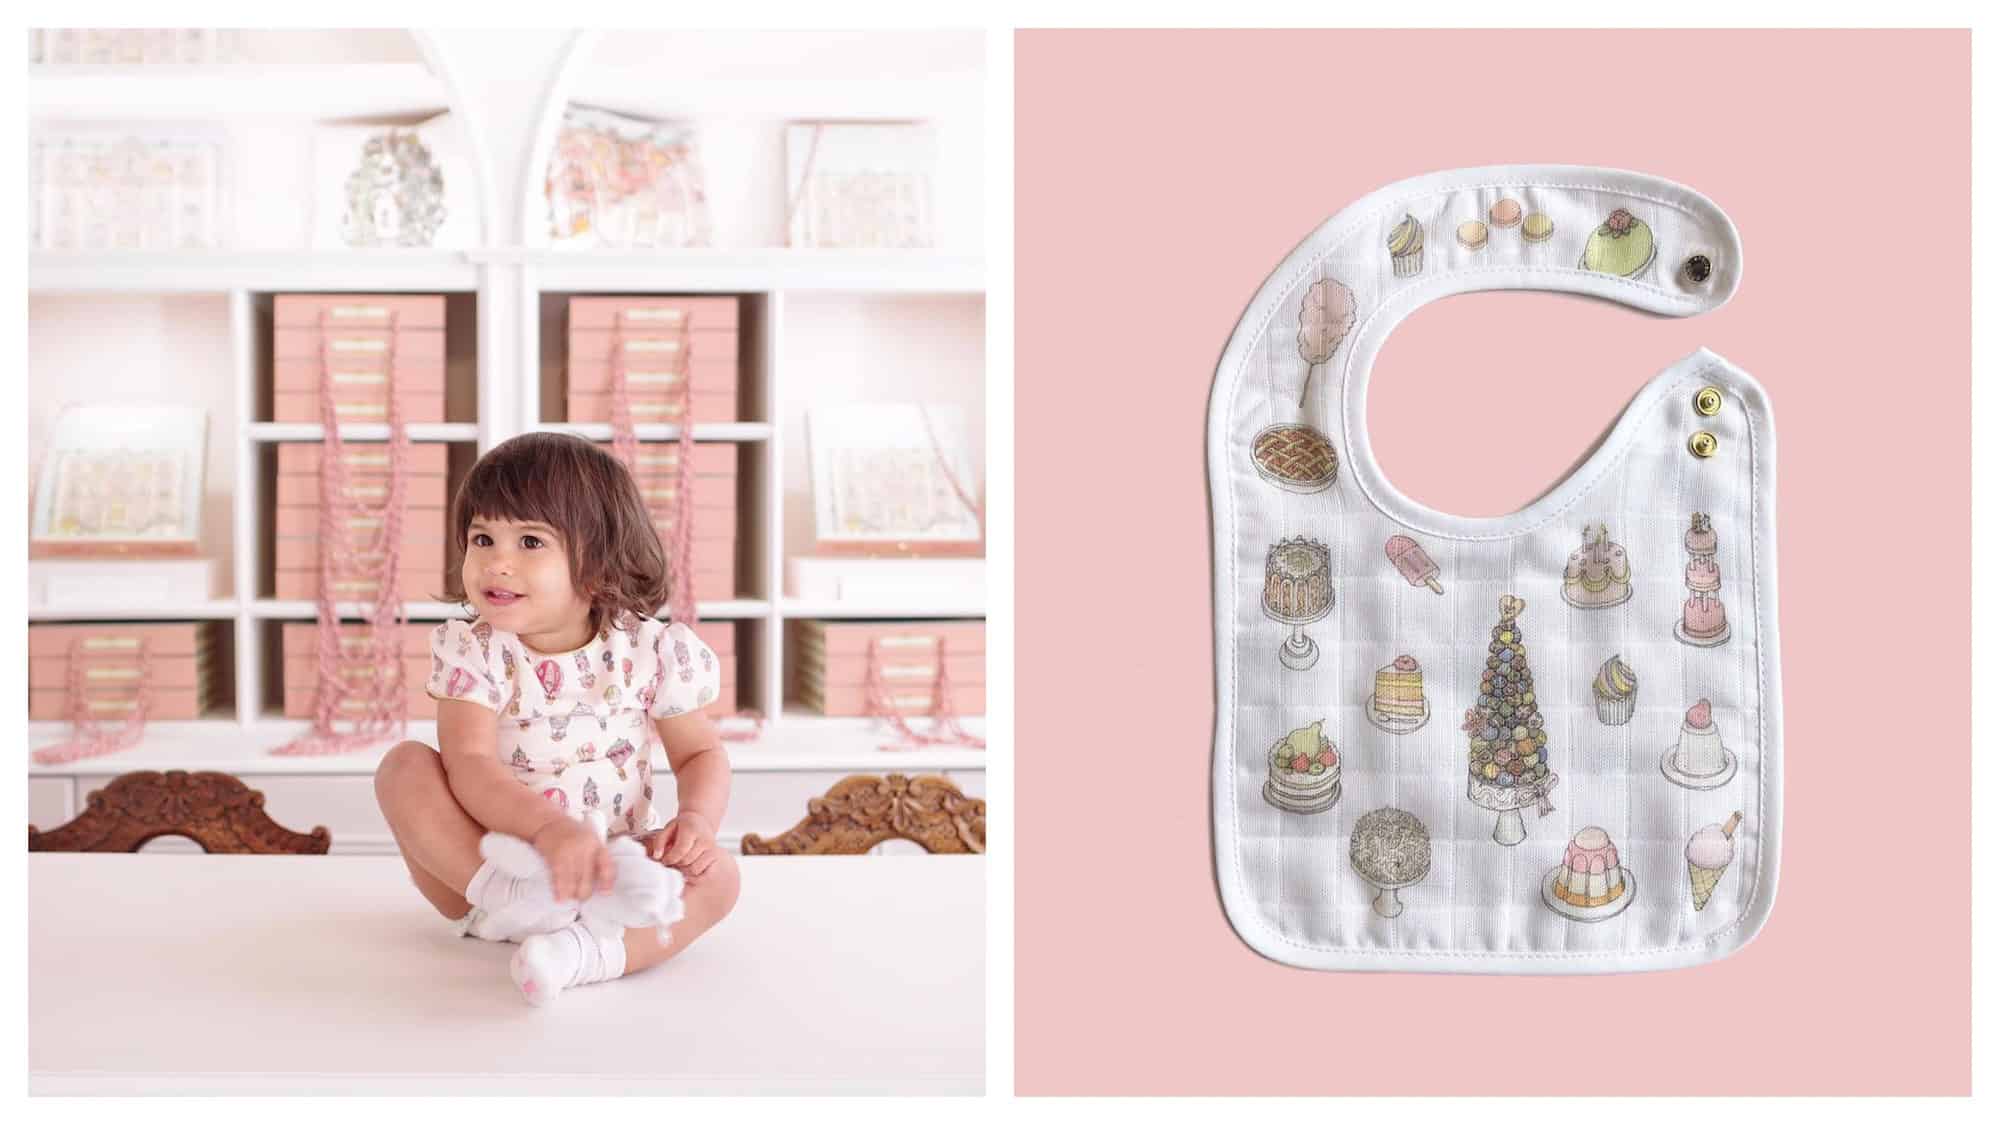 A baby girl sitting the counter of a patisserie wearing a cute outfit from Atelier Choux (left). A bib printed with cute pictures of cakes and ice creams (right).